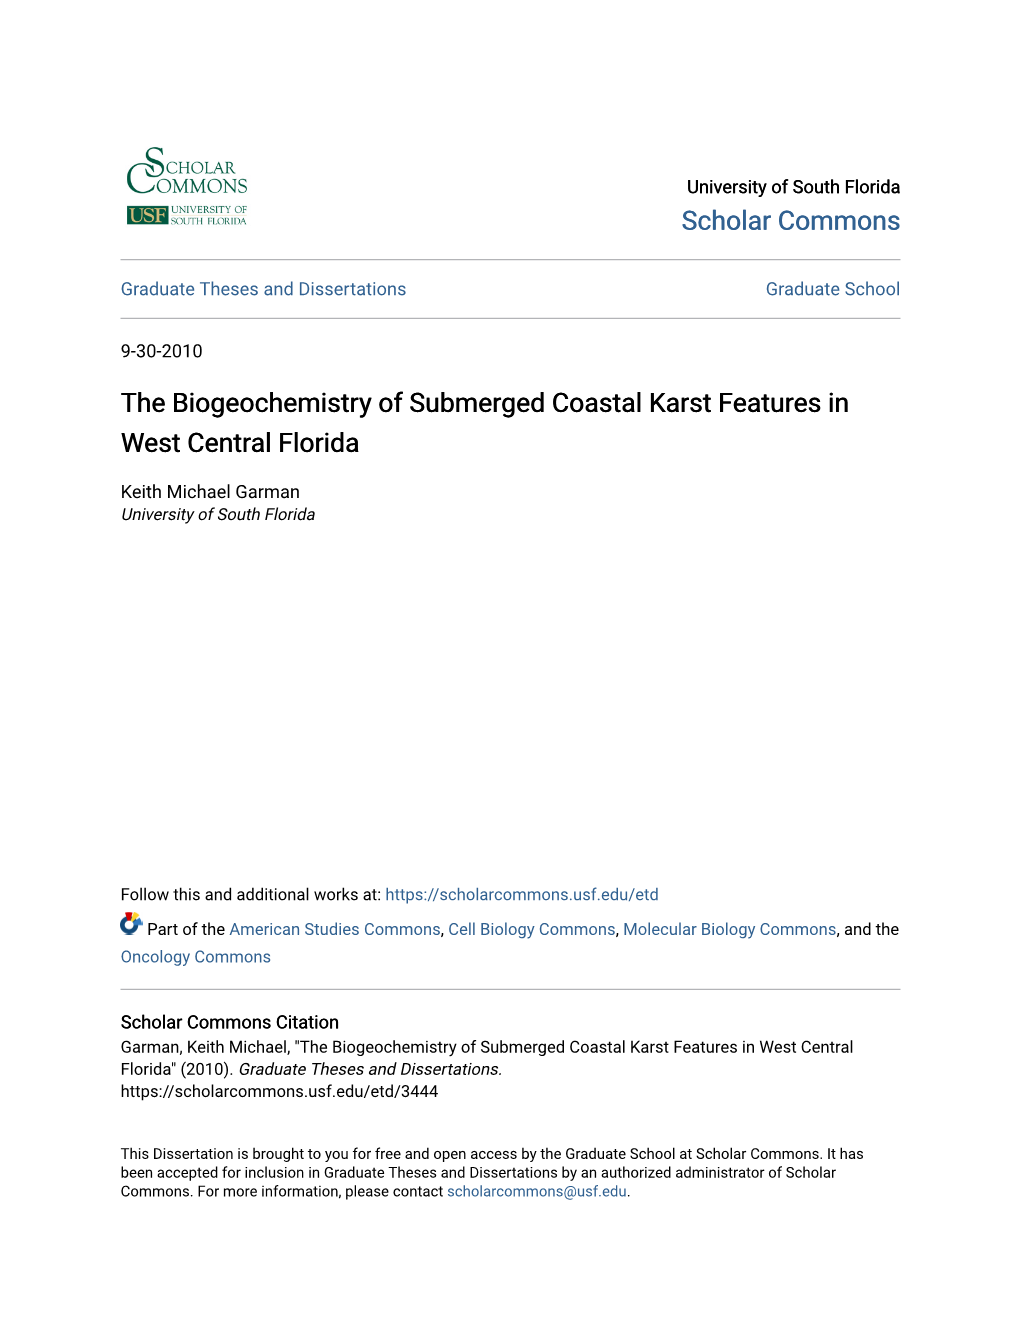 The Biogeochemistry of Submerged Coastal Karst Features in West Central Florida